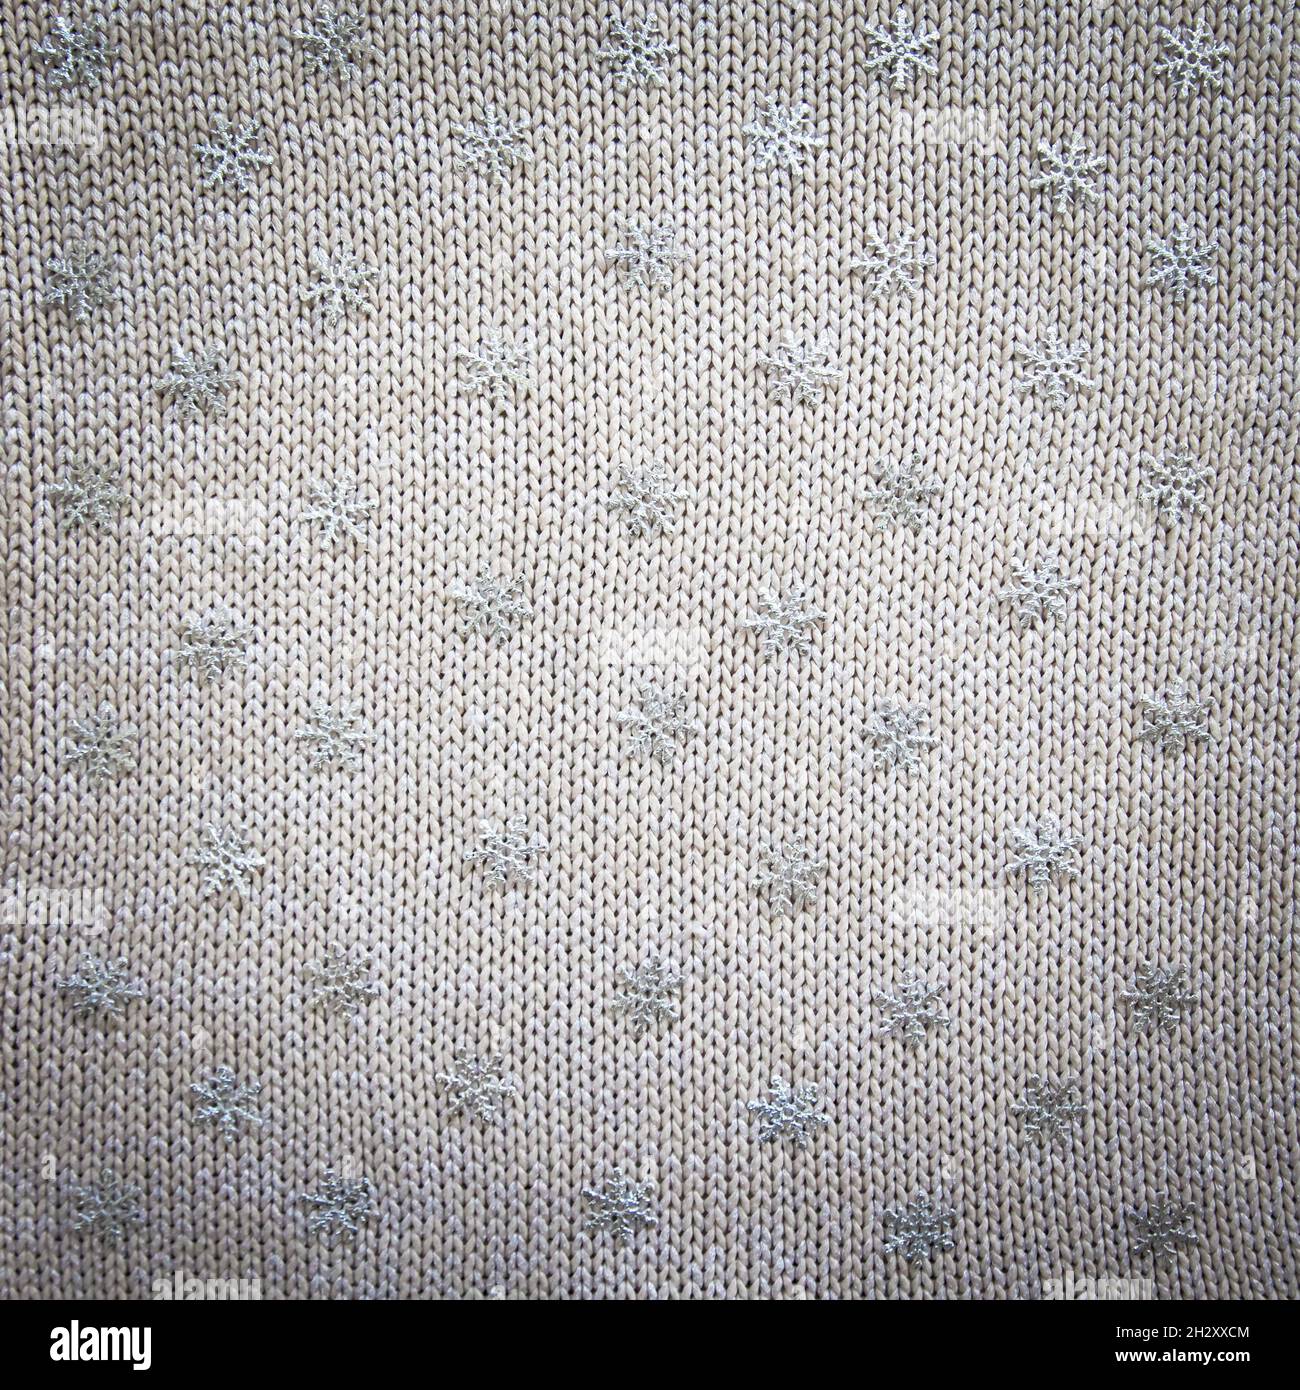 knitted background with snowflakes. Knitted fabric with sequins with snowflakes. Stock Photo